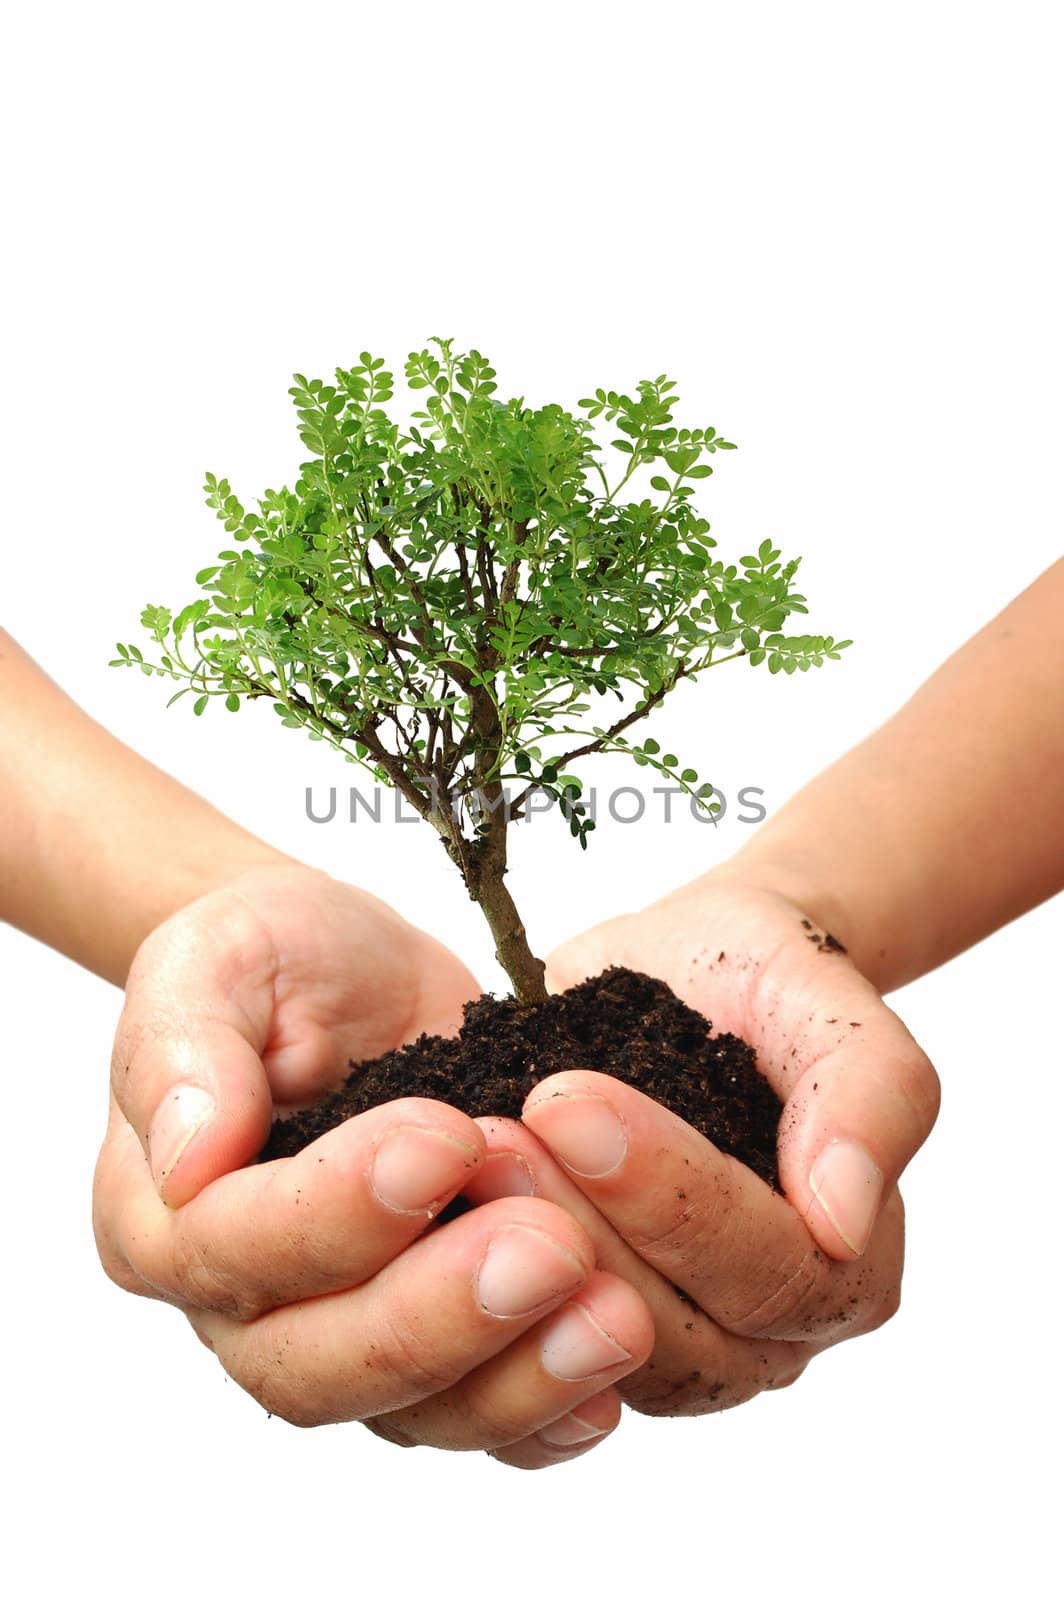 Hands holding a small tree over a white background